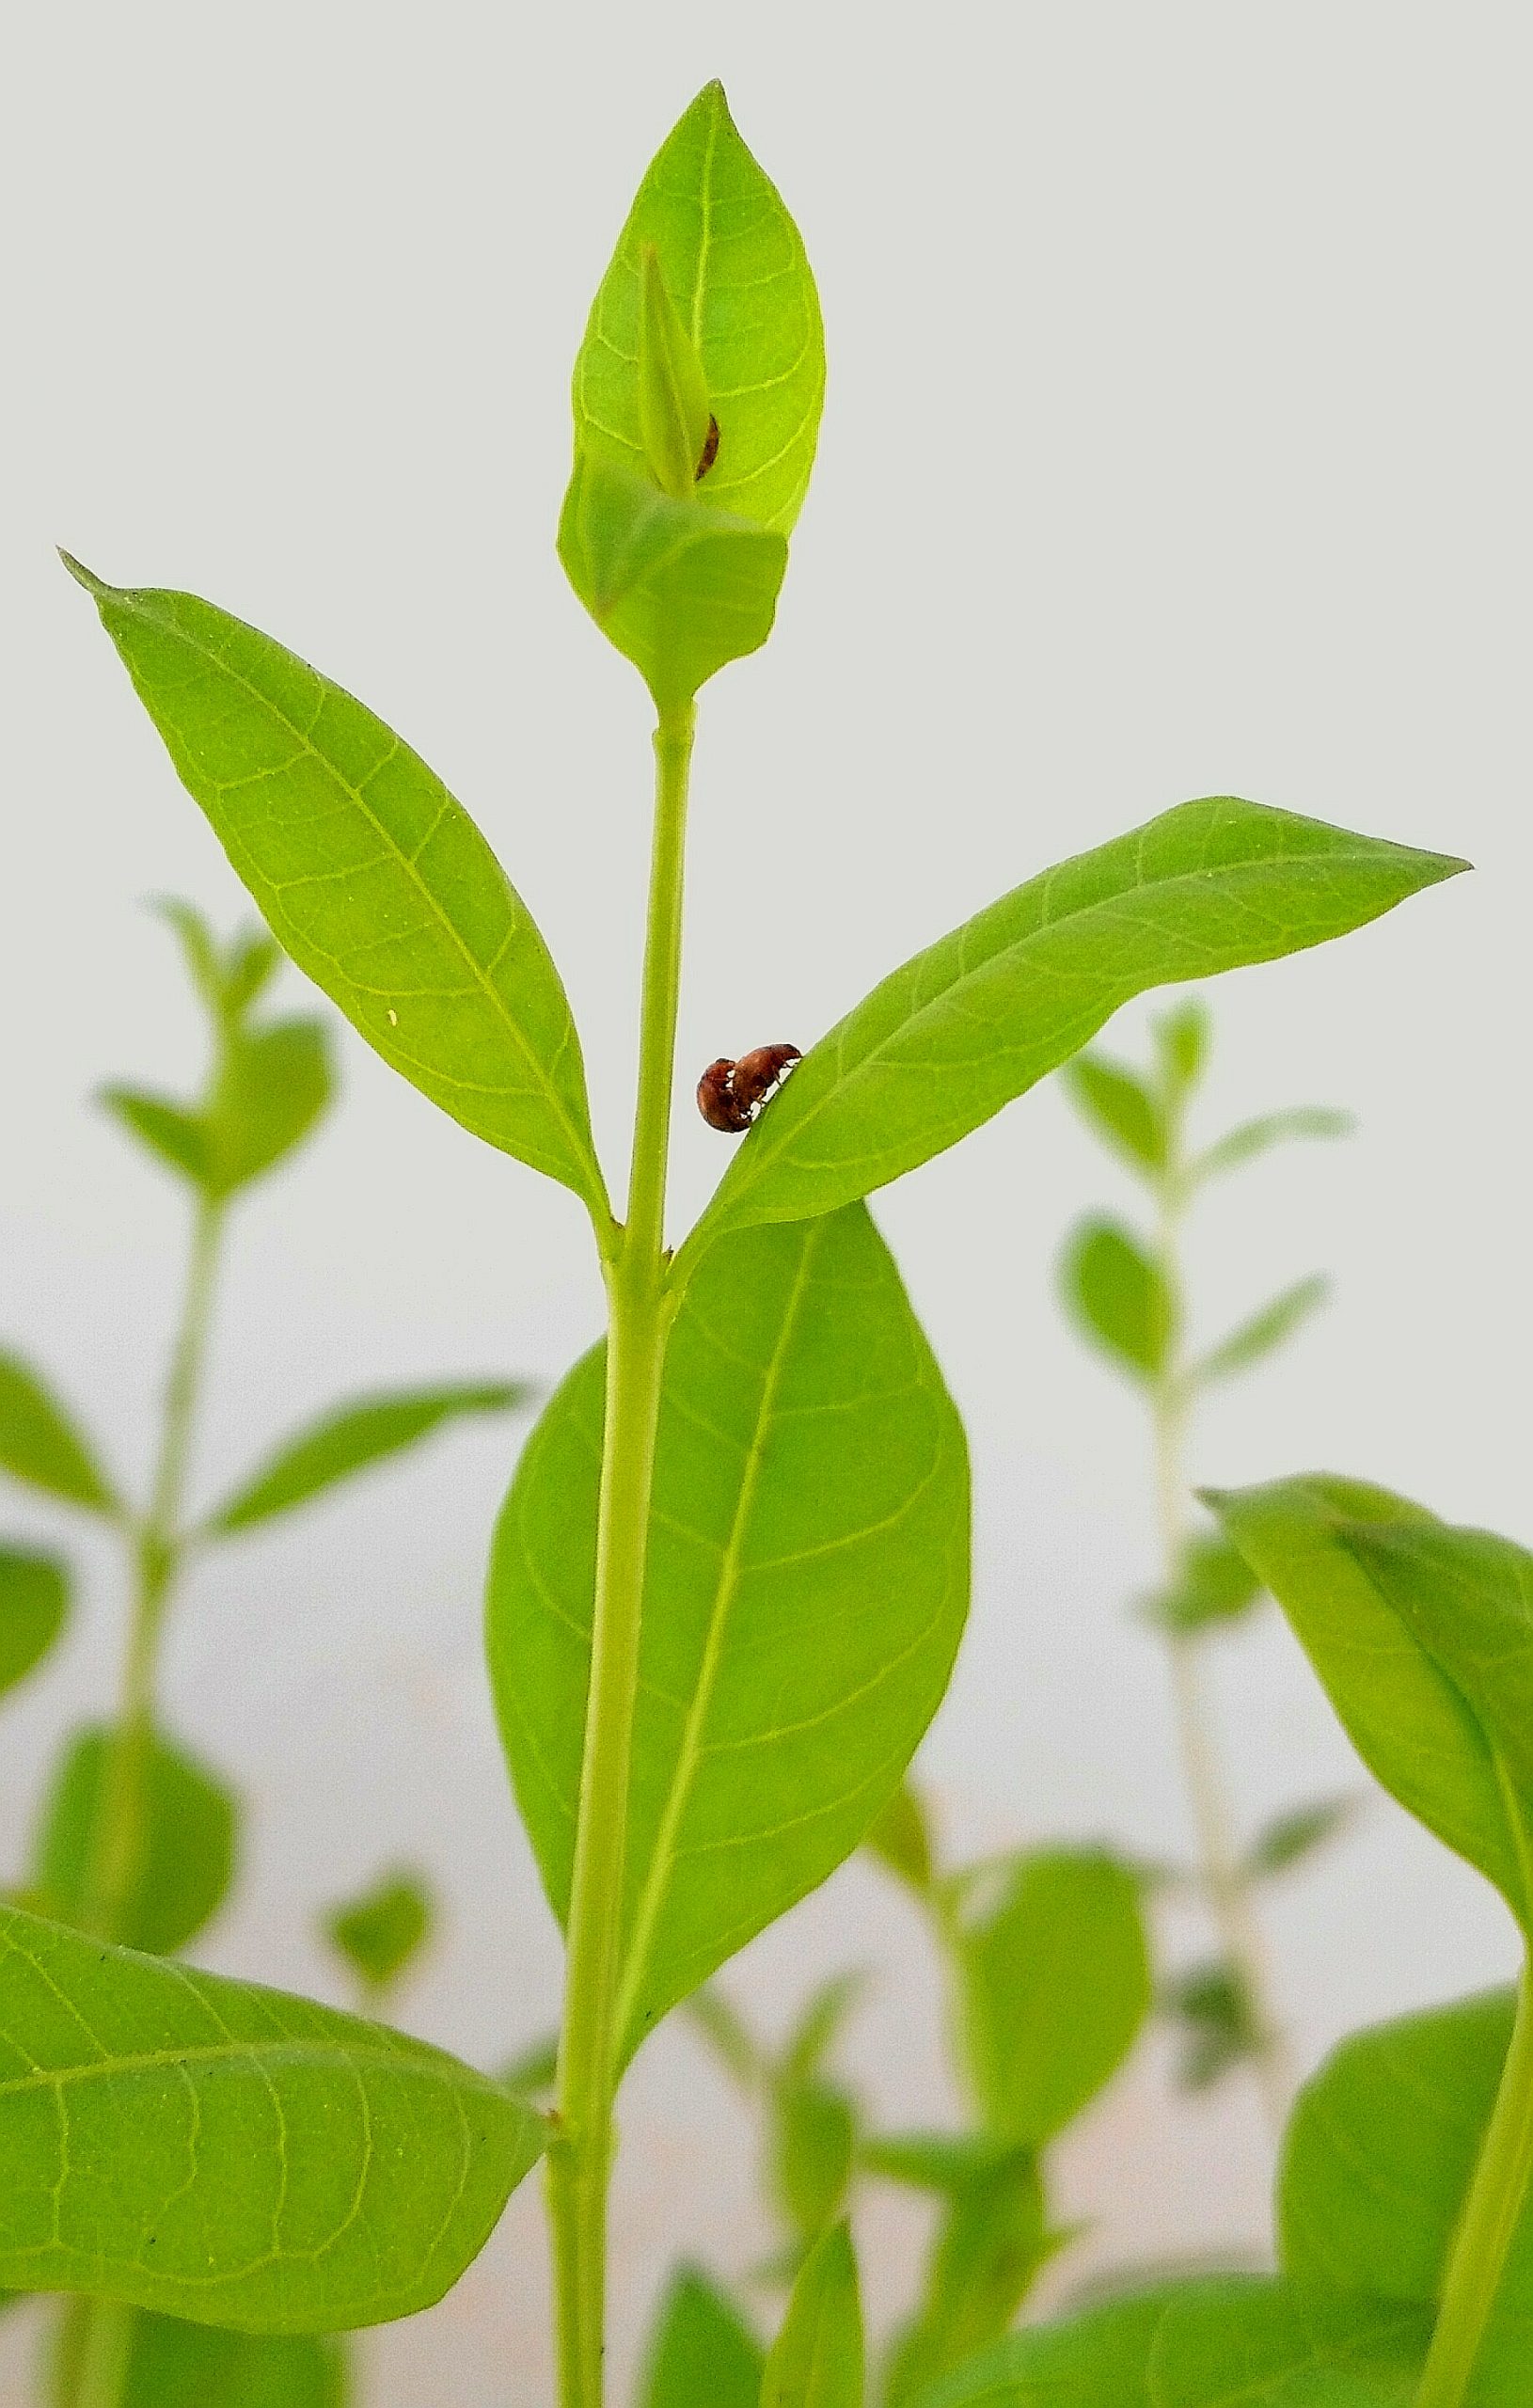 An insect on a green plant